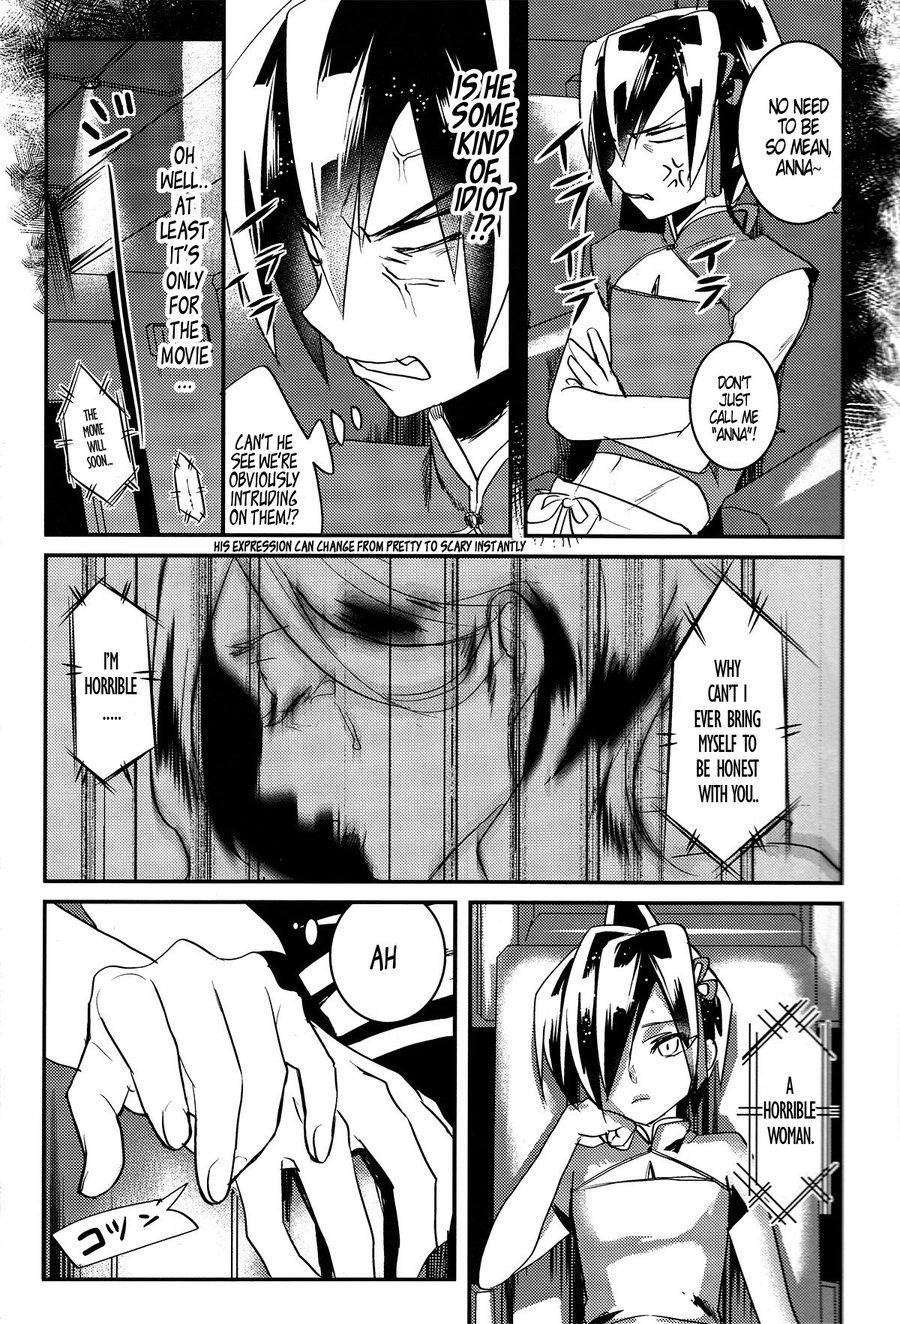 Livecam Lie and Heart - Shaman king Point Of View - Page 9